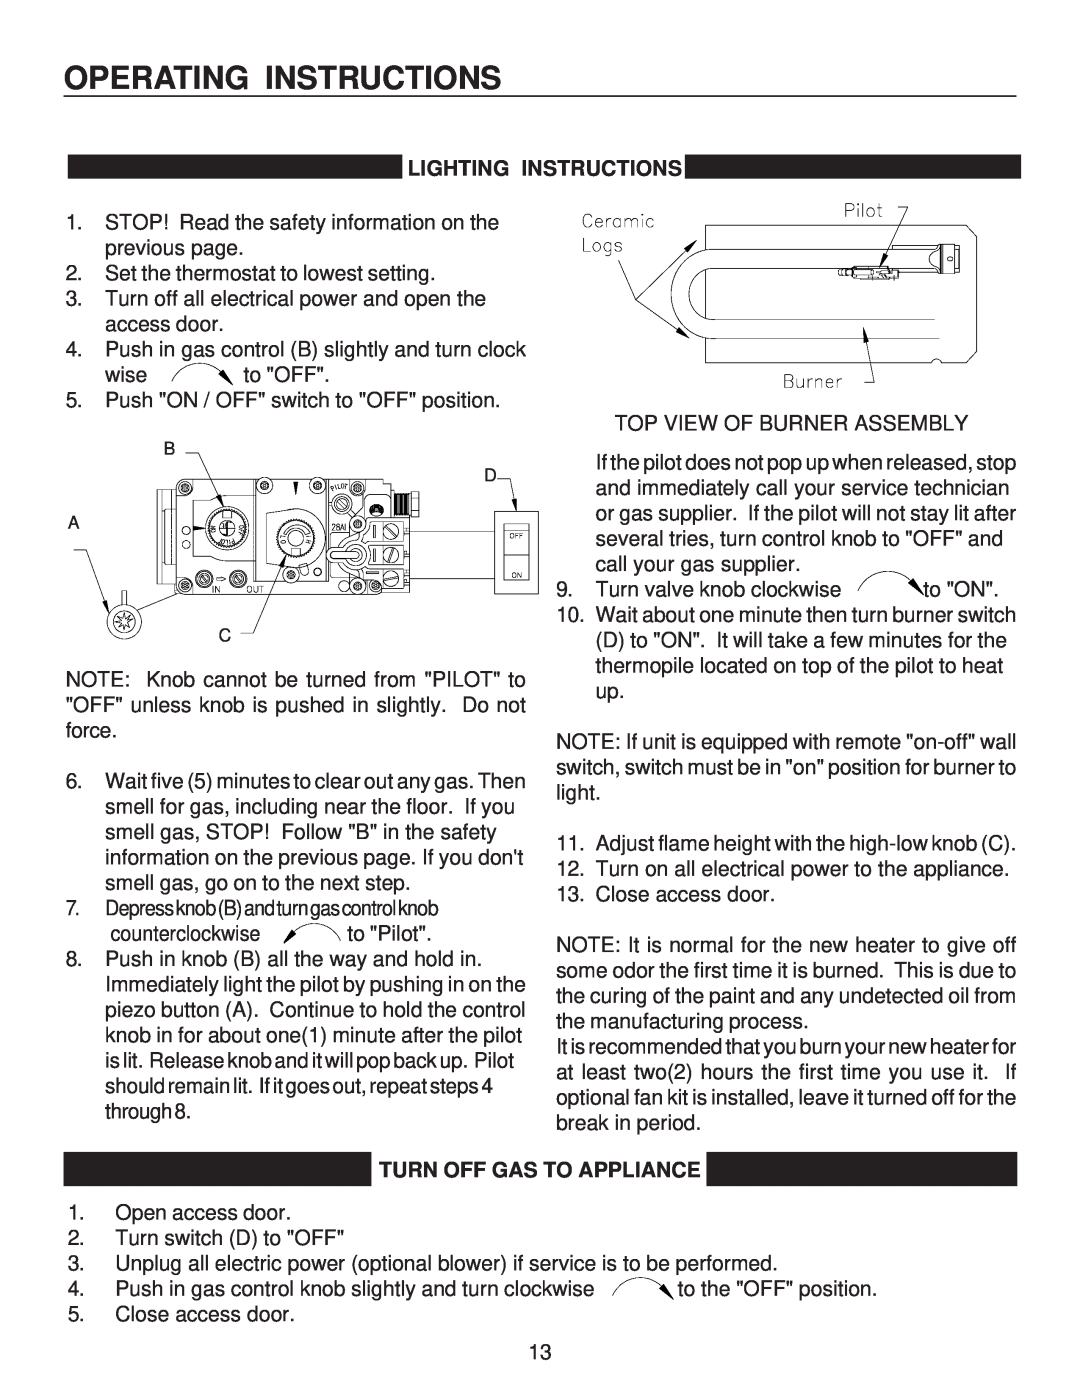 United States Stove B9945L manual Lighting Instructions, Turn Off Gas To Appliance, Operating Instructions 